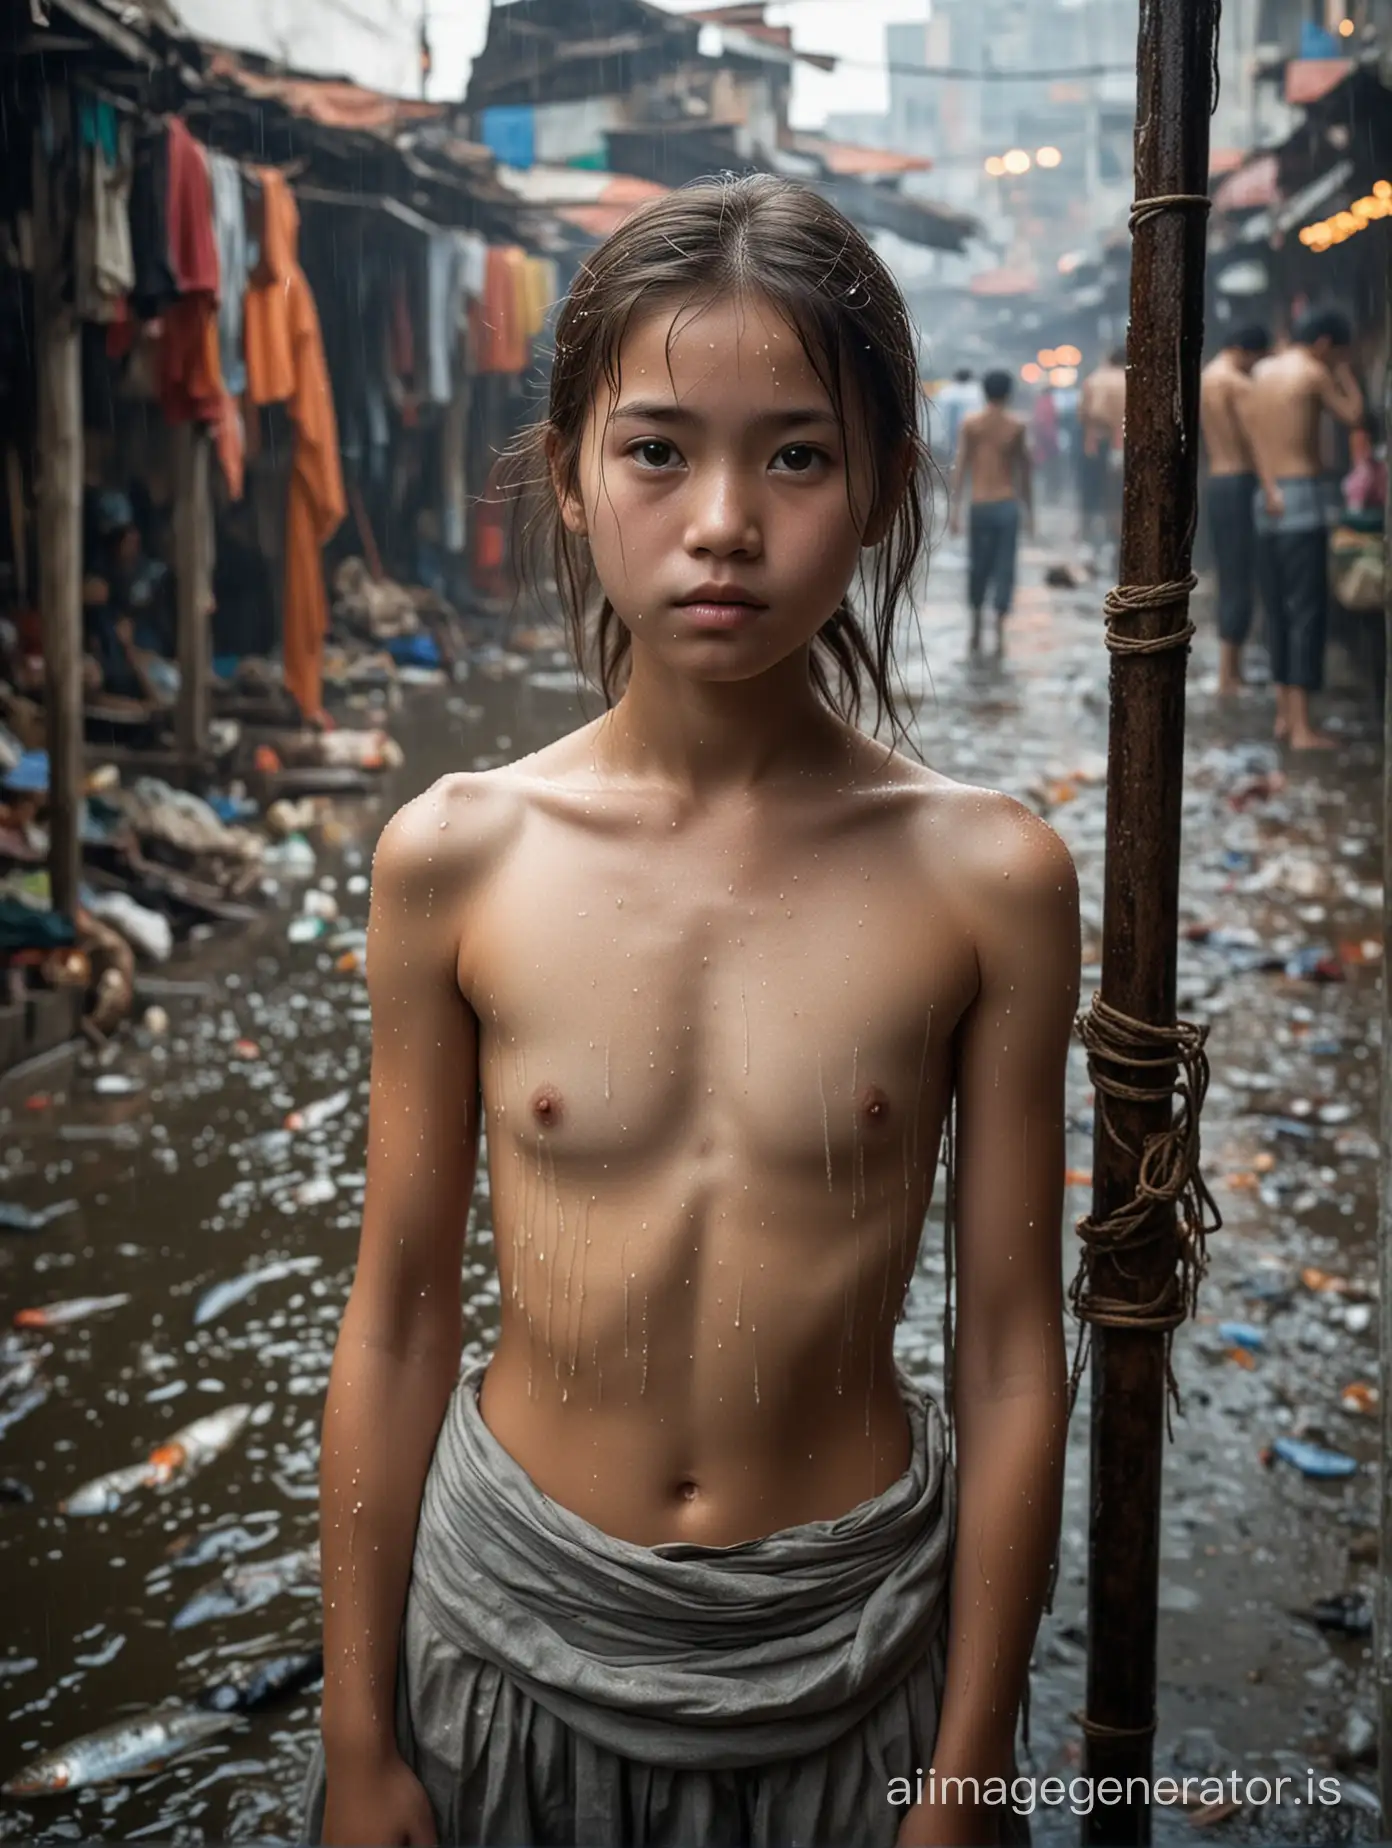 Barefoot-Girl-in-Asian-Fish-Market-A-Poignant-Portrait-of-Resilience-and-Vulnerability